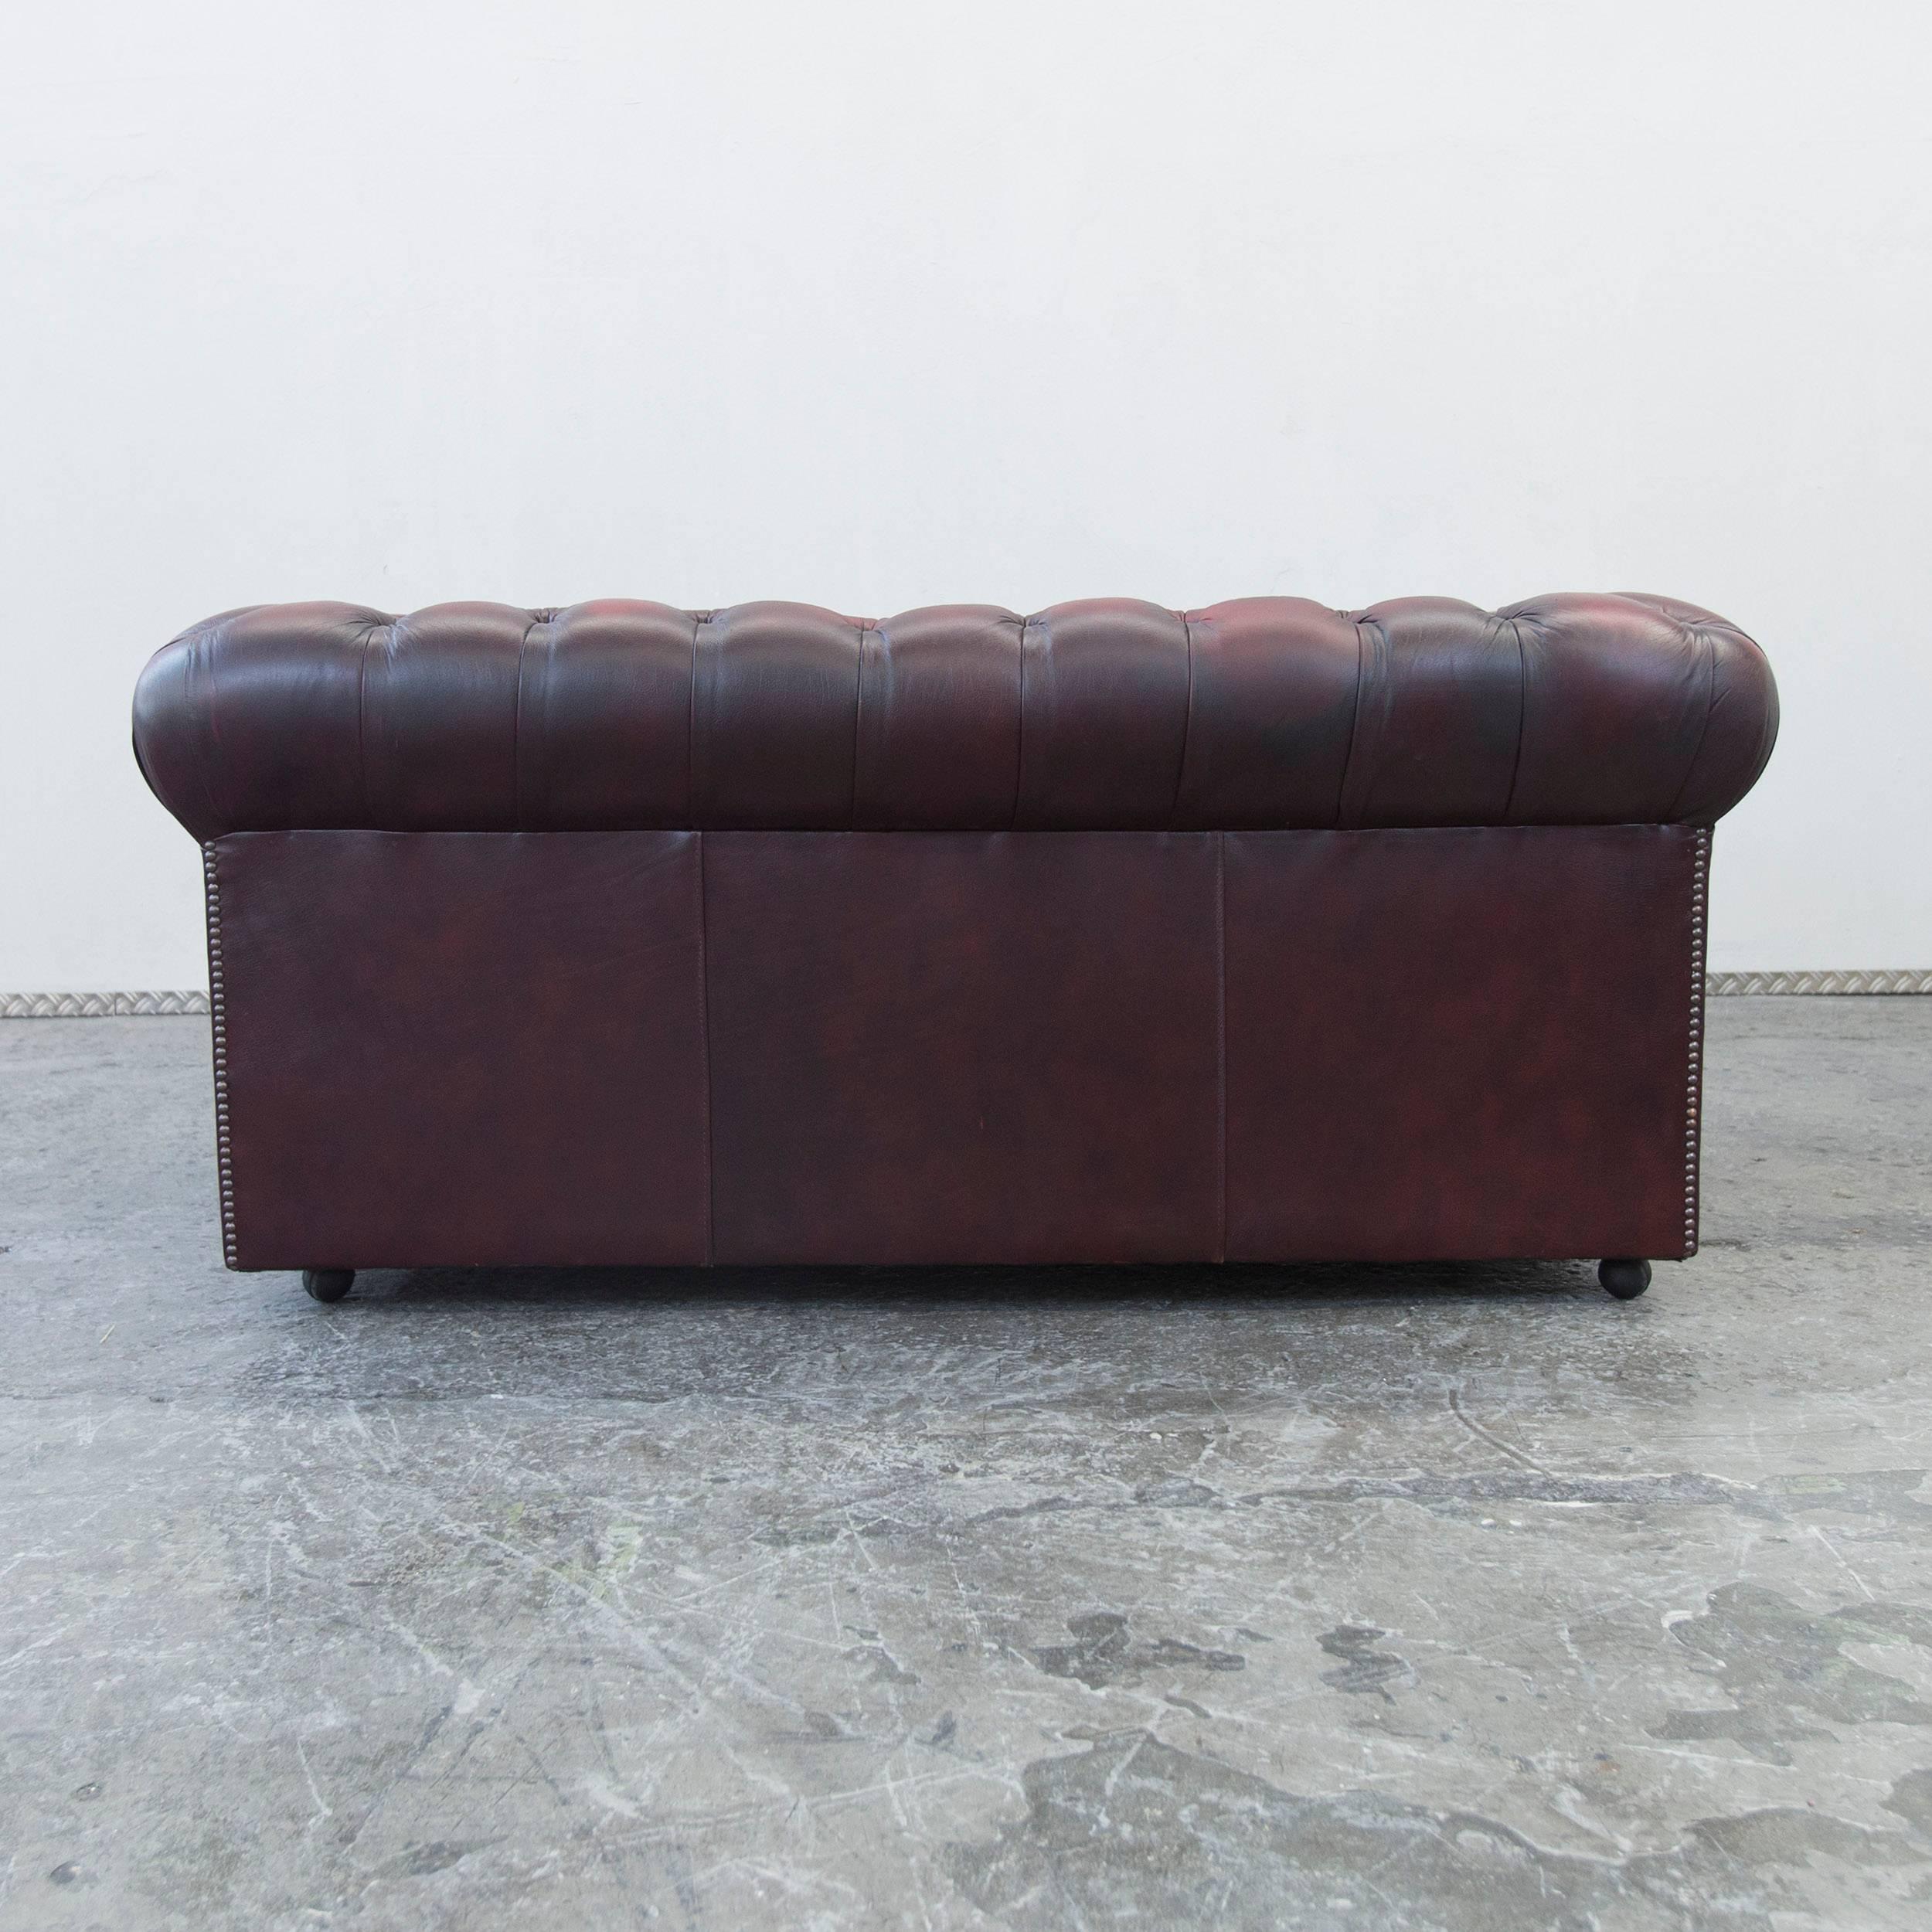 20th Century Chesterfield Leather Sofa Oxblood Red Two-Seat Couch Vintage Retro